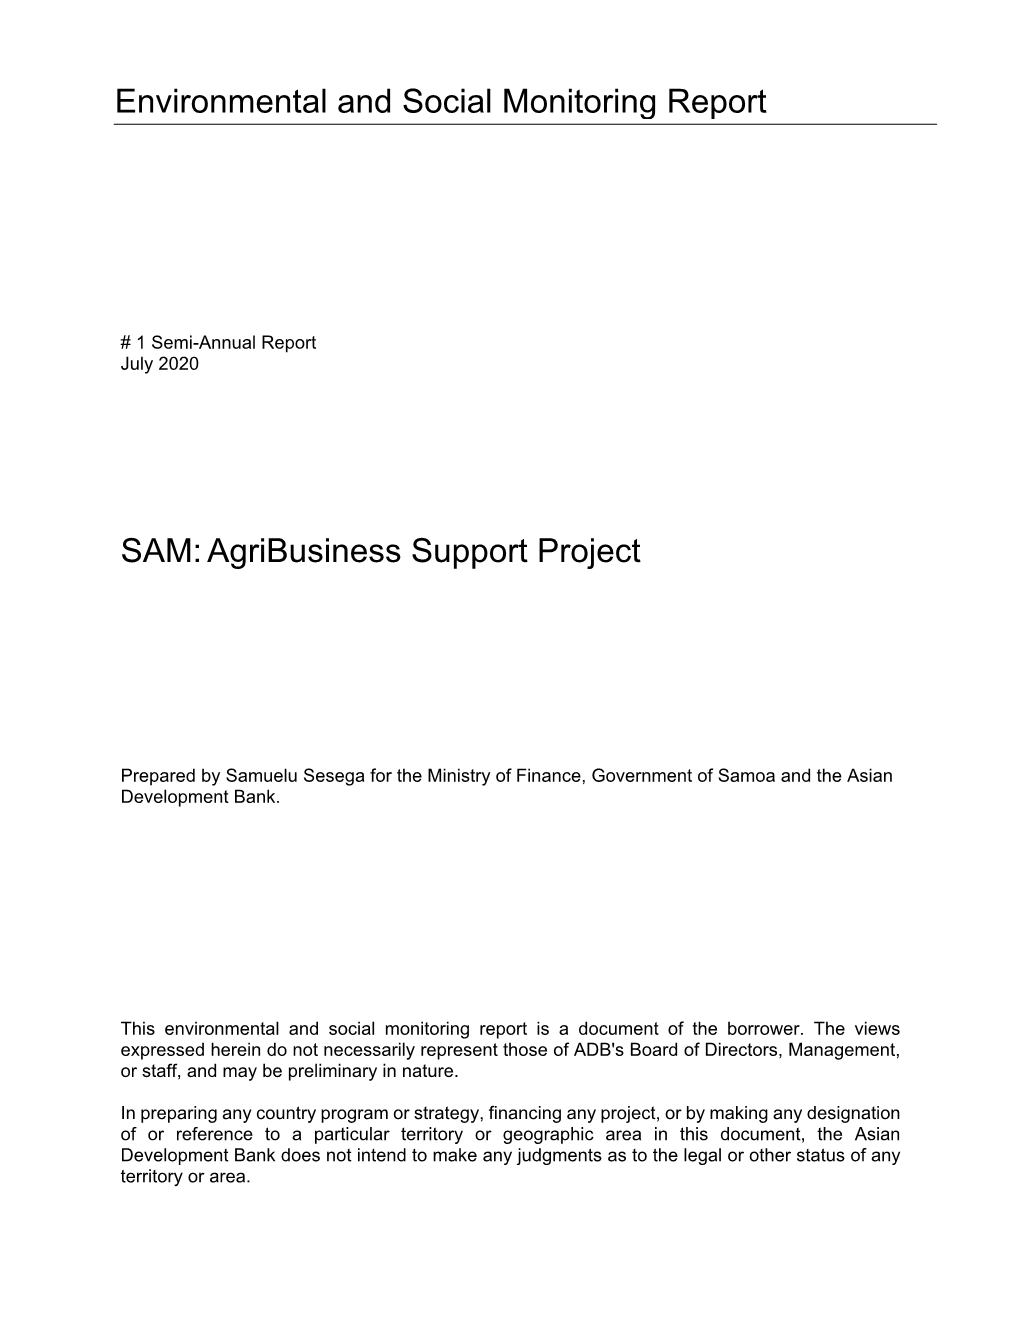 Environmental and Social Monitoring Report SAM:Agribusiness Support